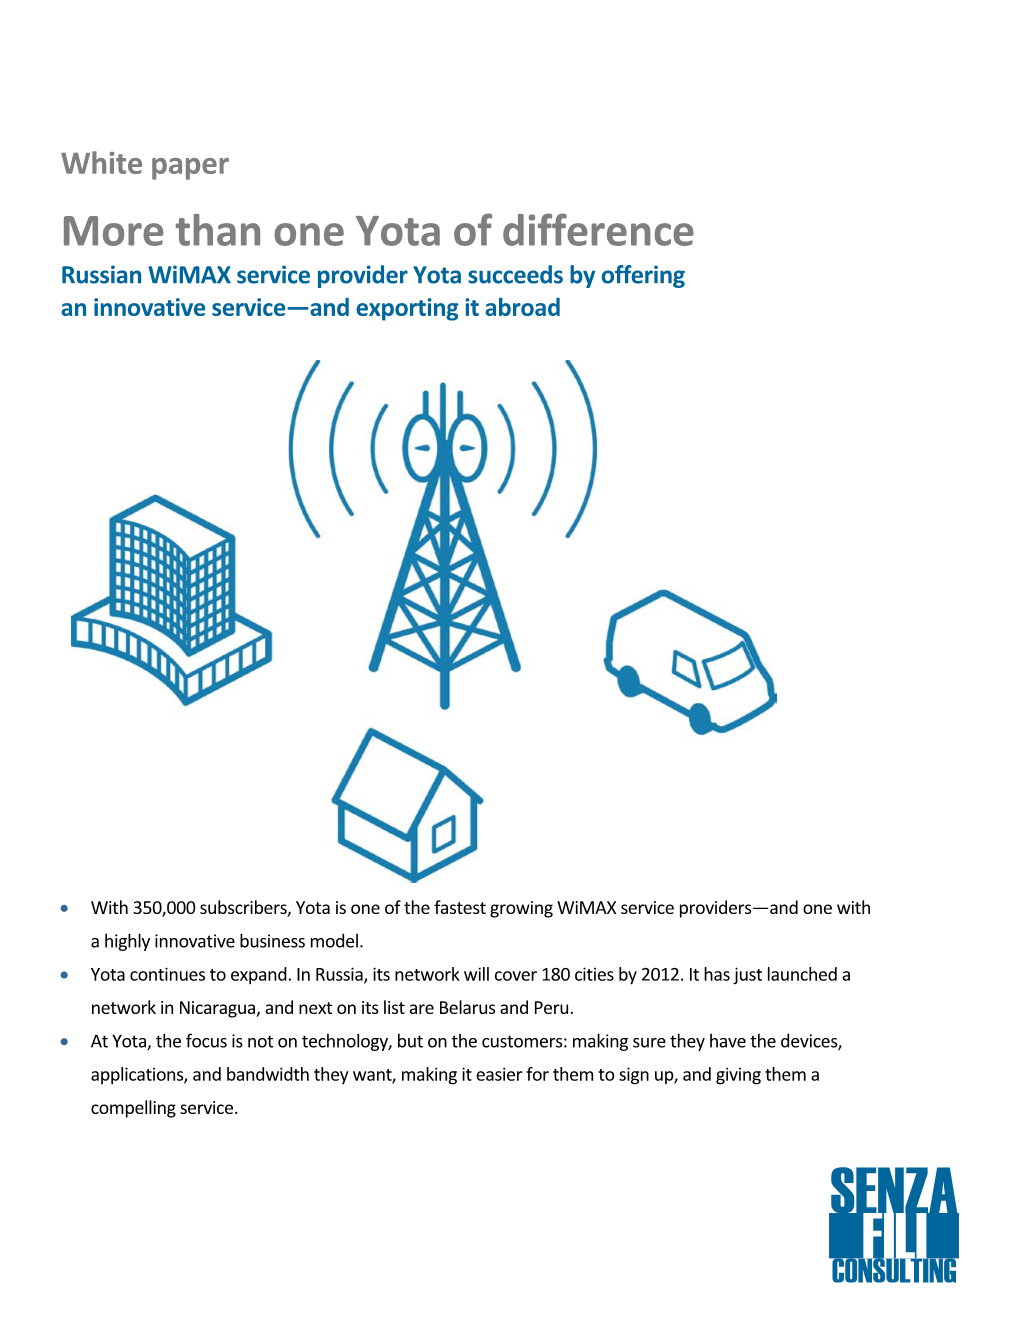 Than One Yota of Difference Russian Wimax Service Provider Yota Succeeds by Offering an Innovative Service—And Exporting It Abroad